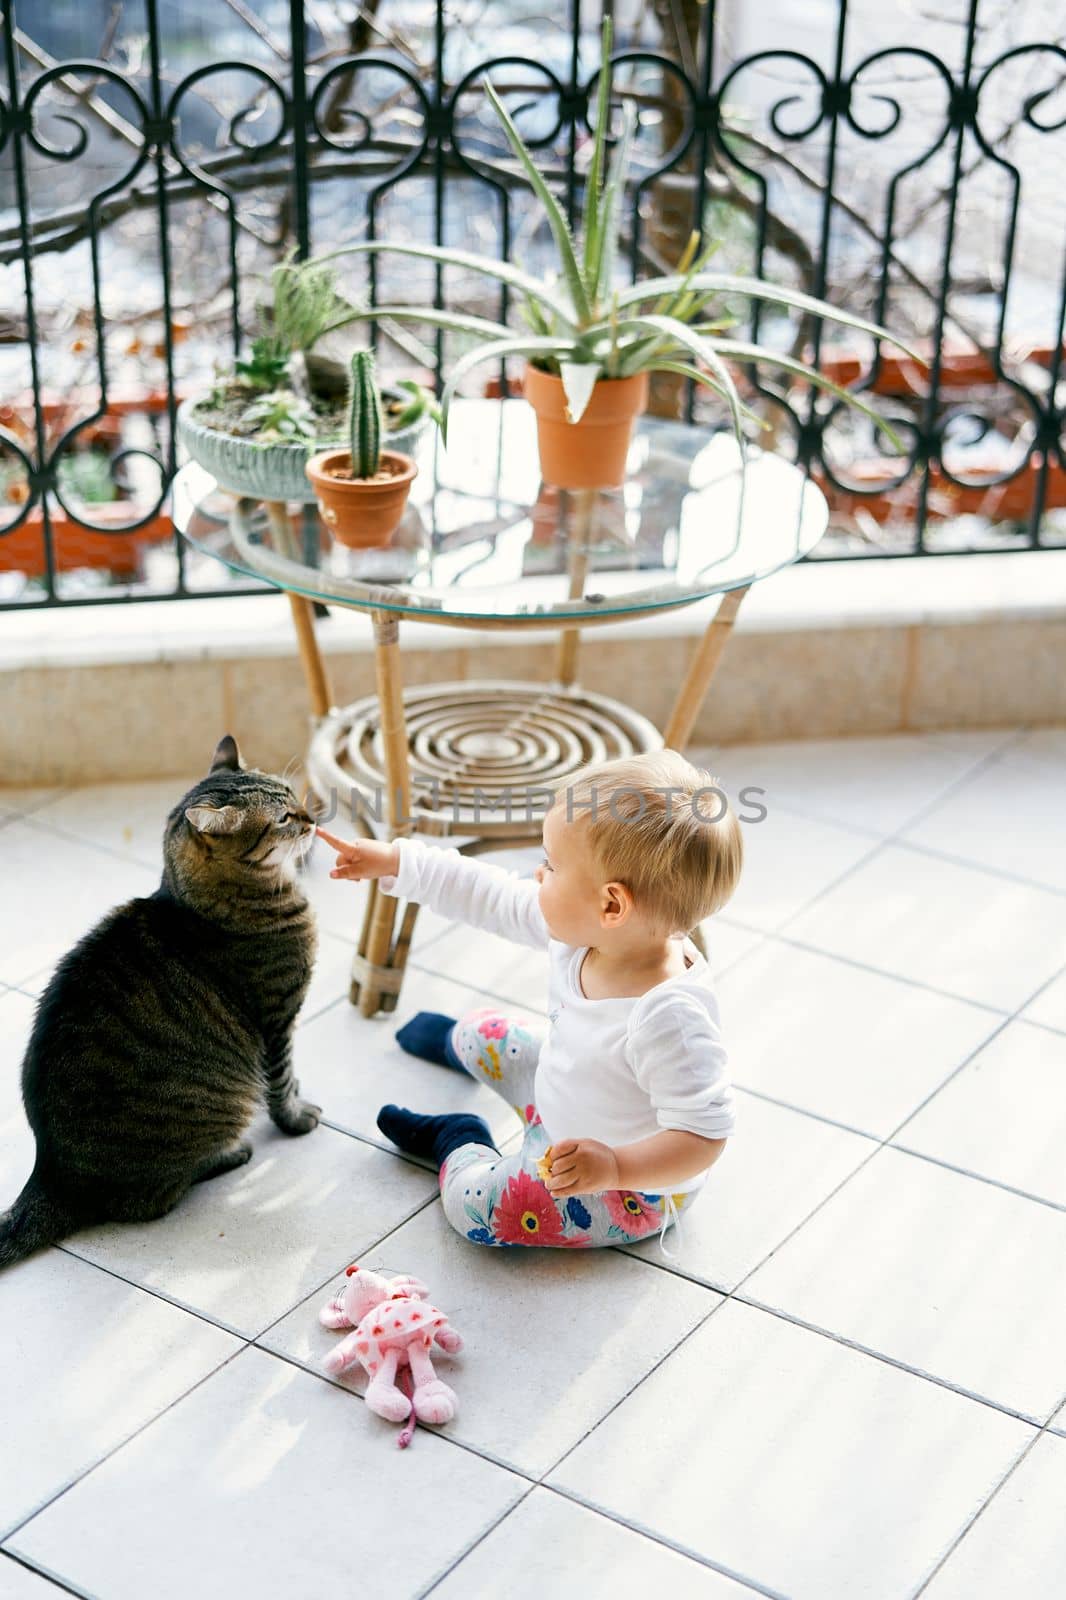 Small kid sits on the balcony near a table with flowerpots and pokes a finger in the nose of a tabby cat by Nadtochiy